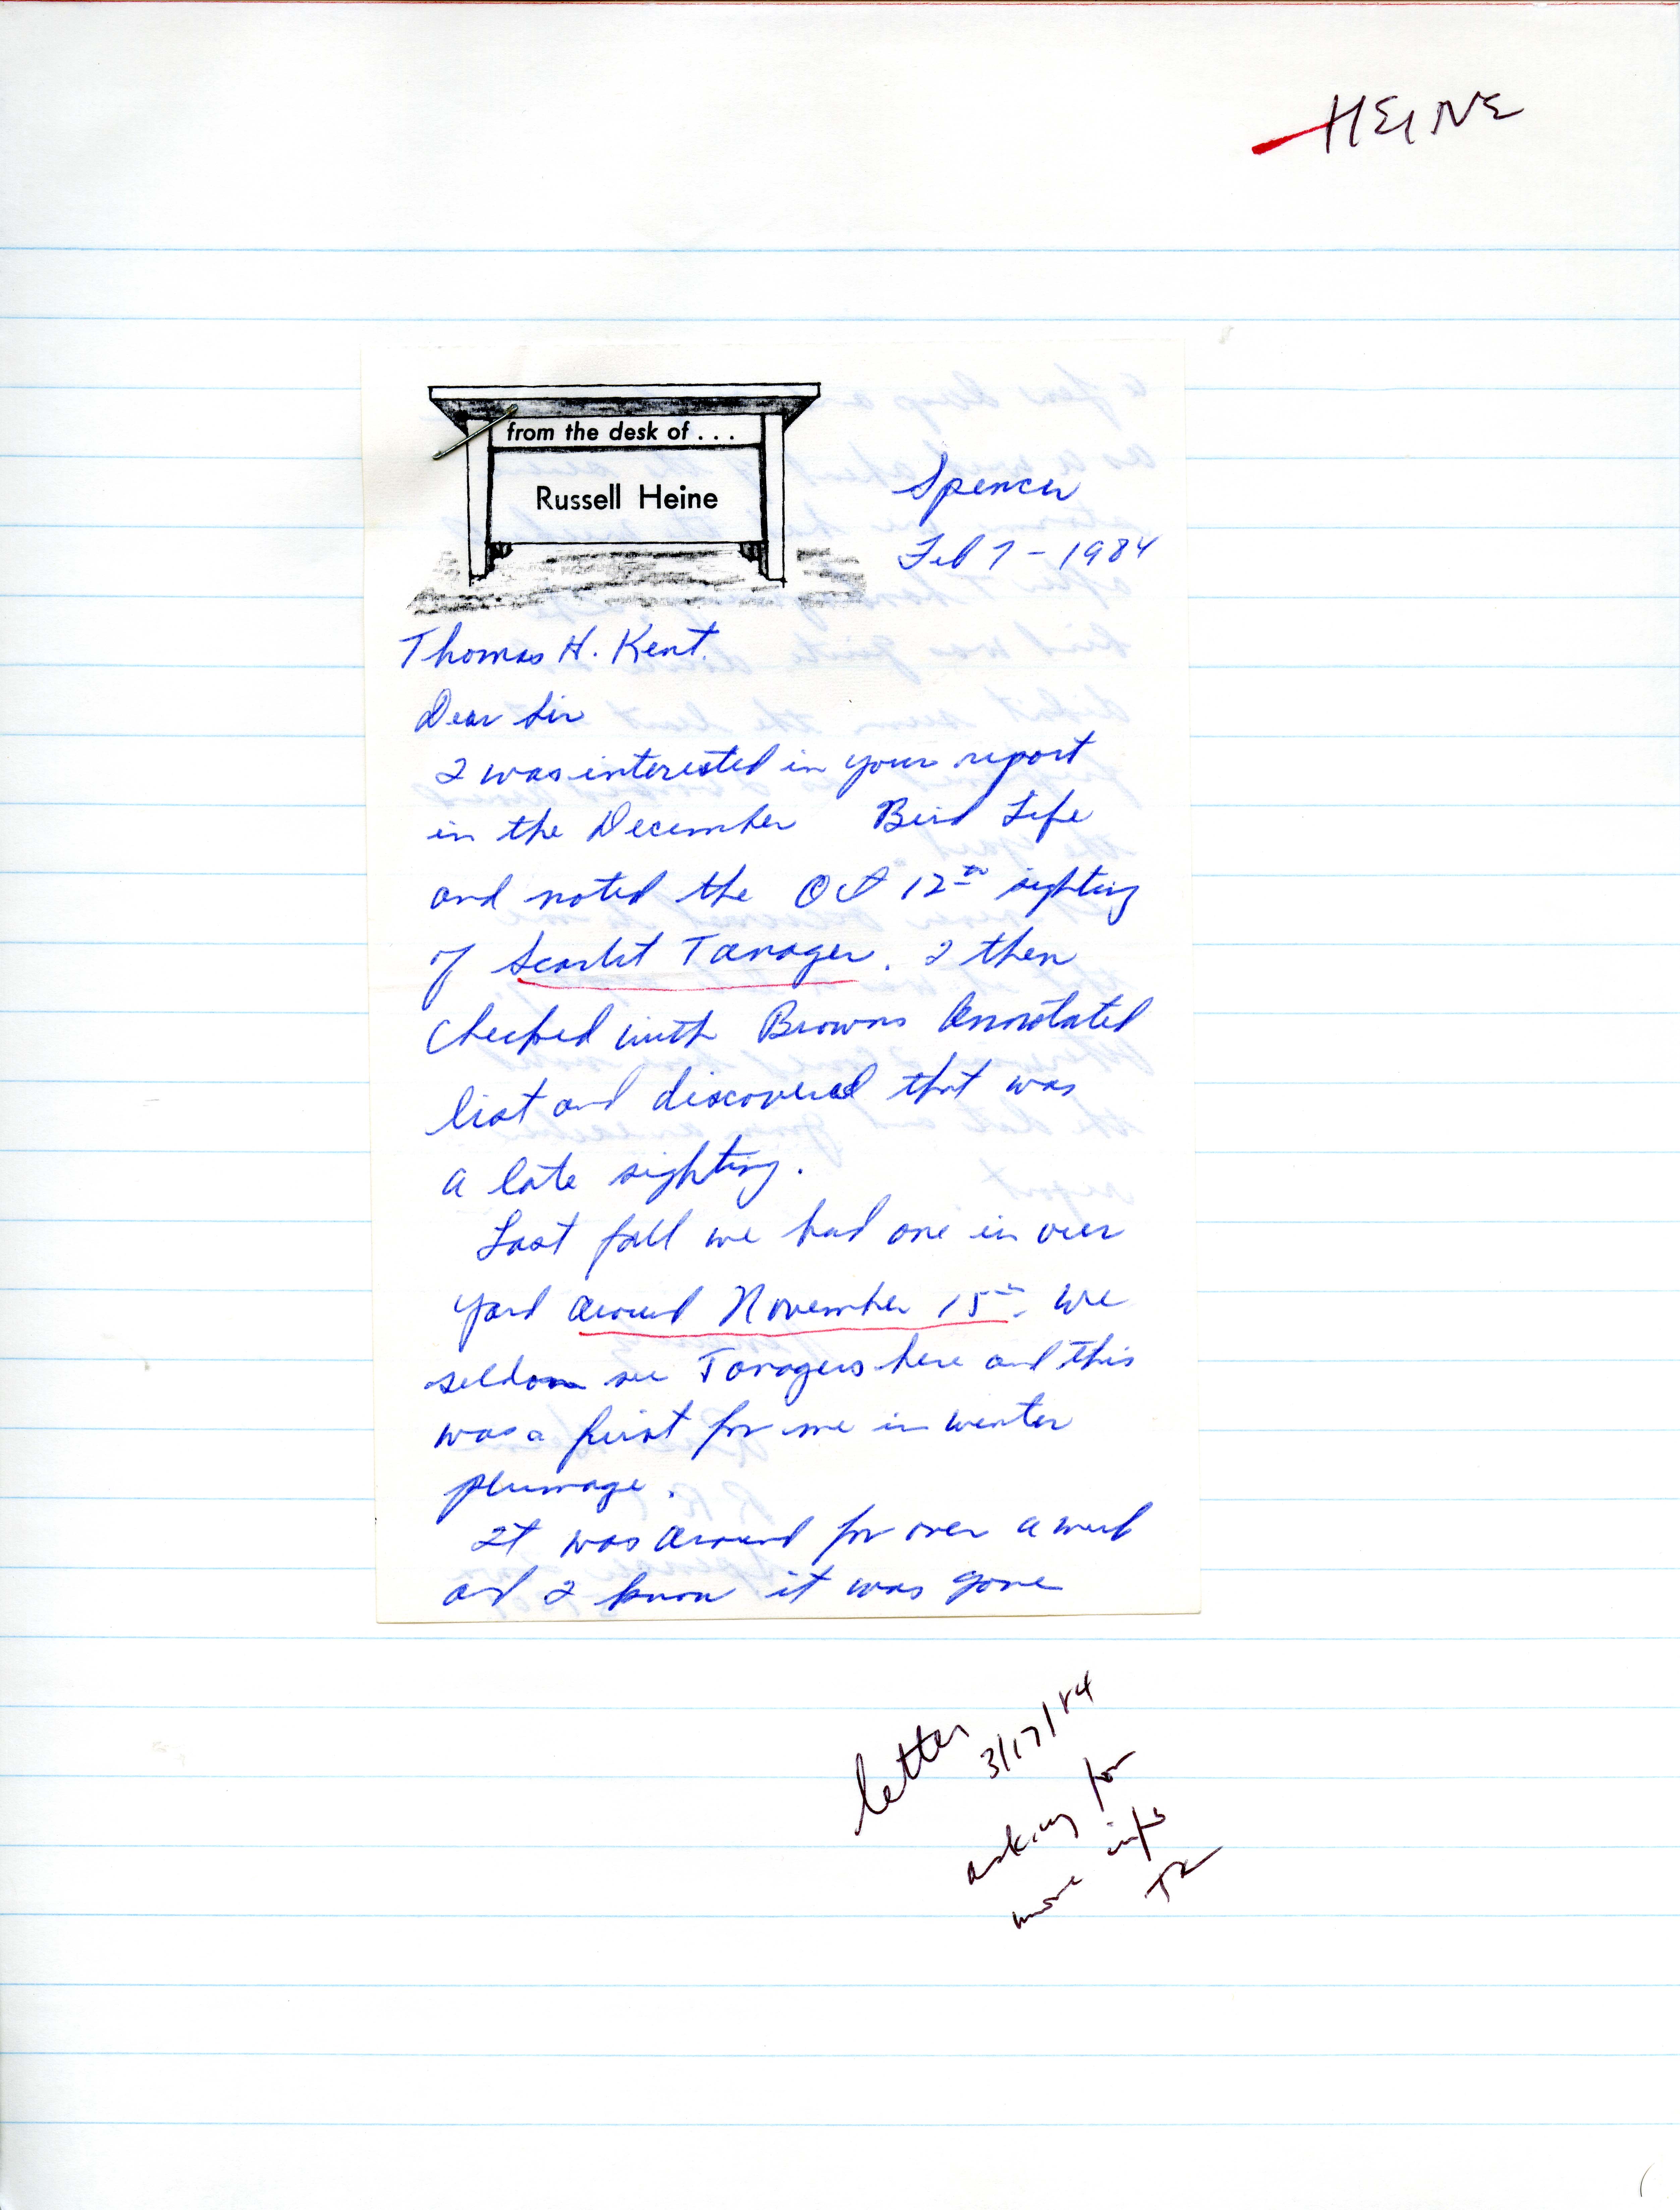 Russell Heine letter to Thomas H. Kent regarding late sighting of a Scarlet Tanager, February 7, 1984